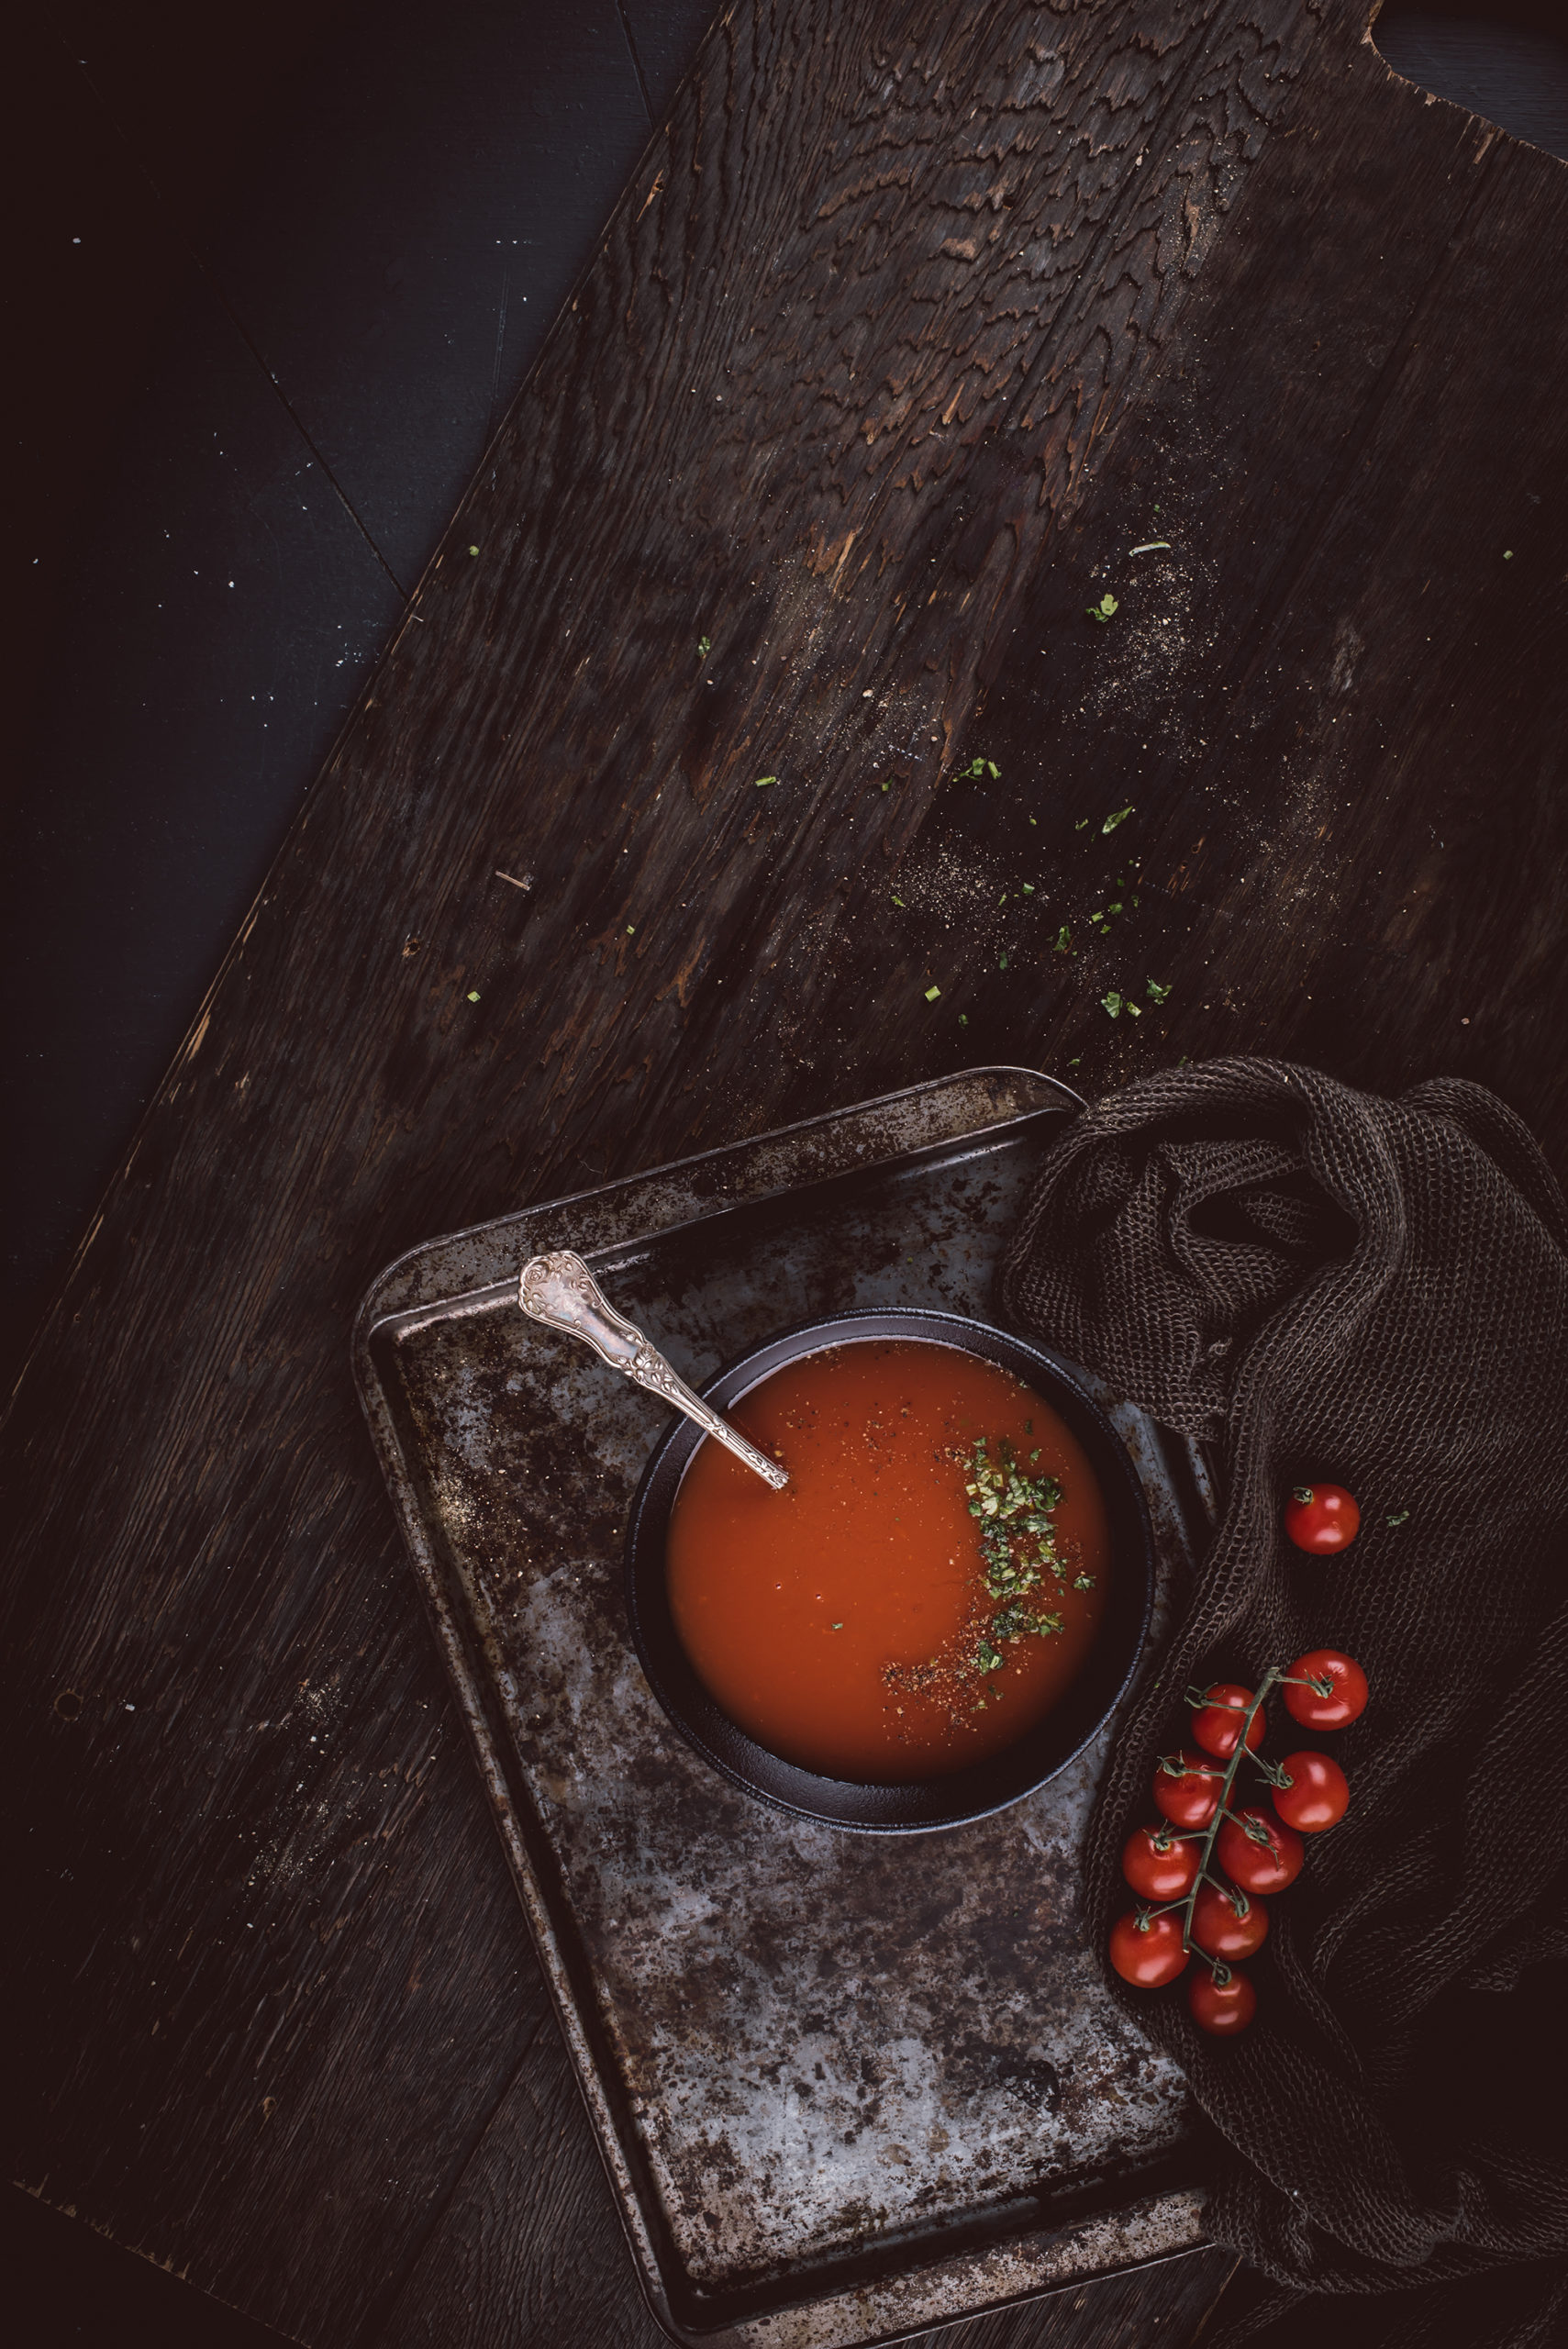 See how I transform ordinary ingredients like tomato soup into something beautiful for food photography. Click to see behind the scenes.